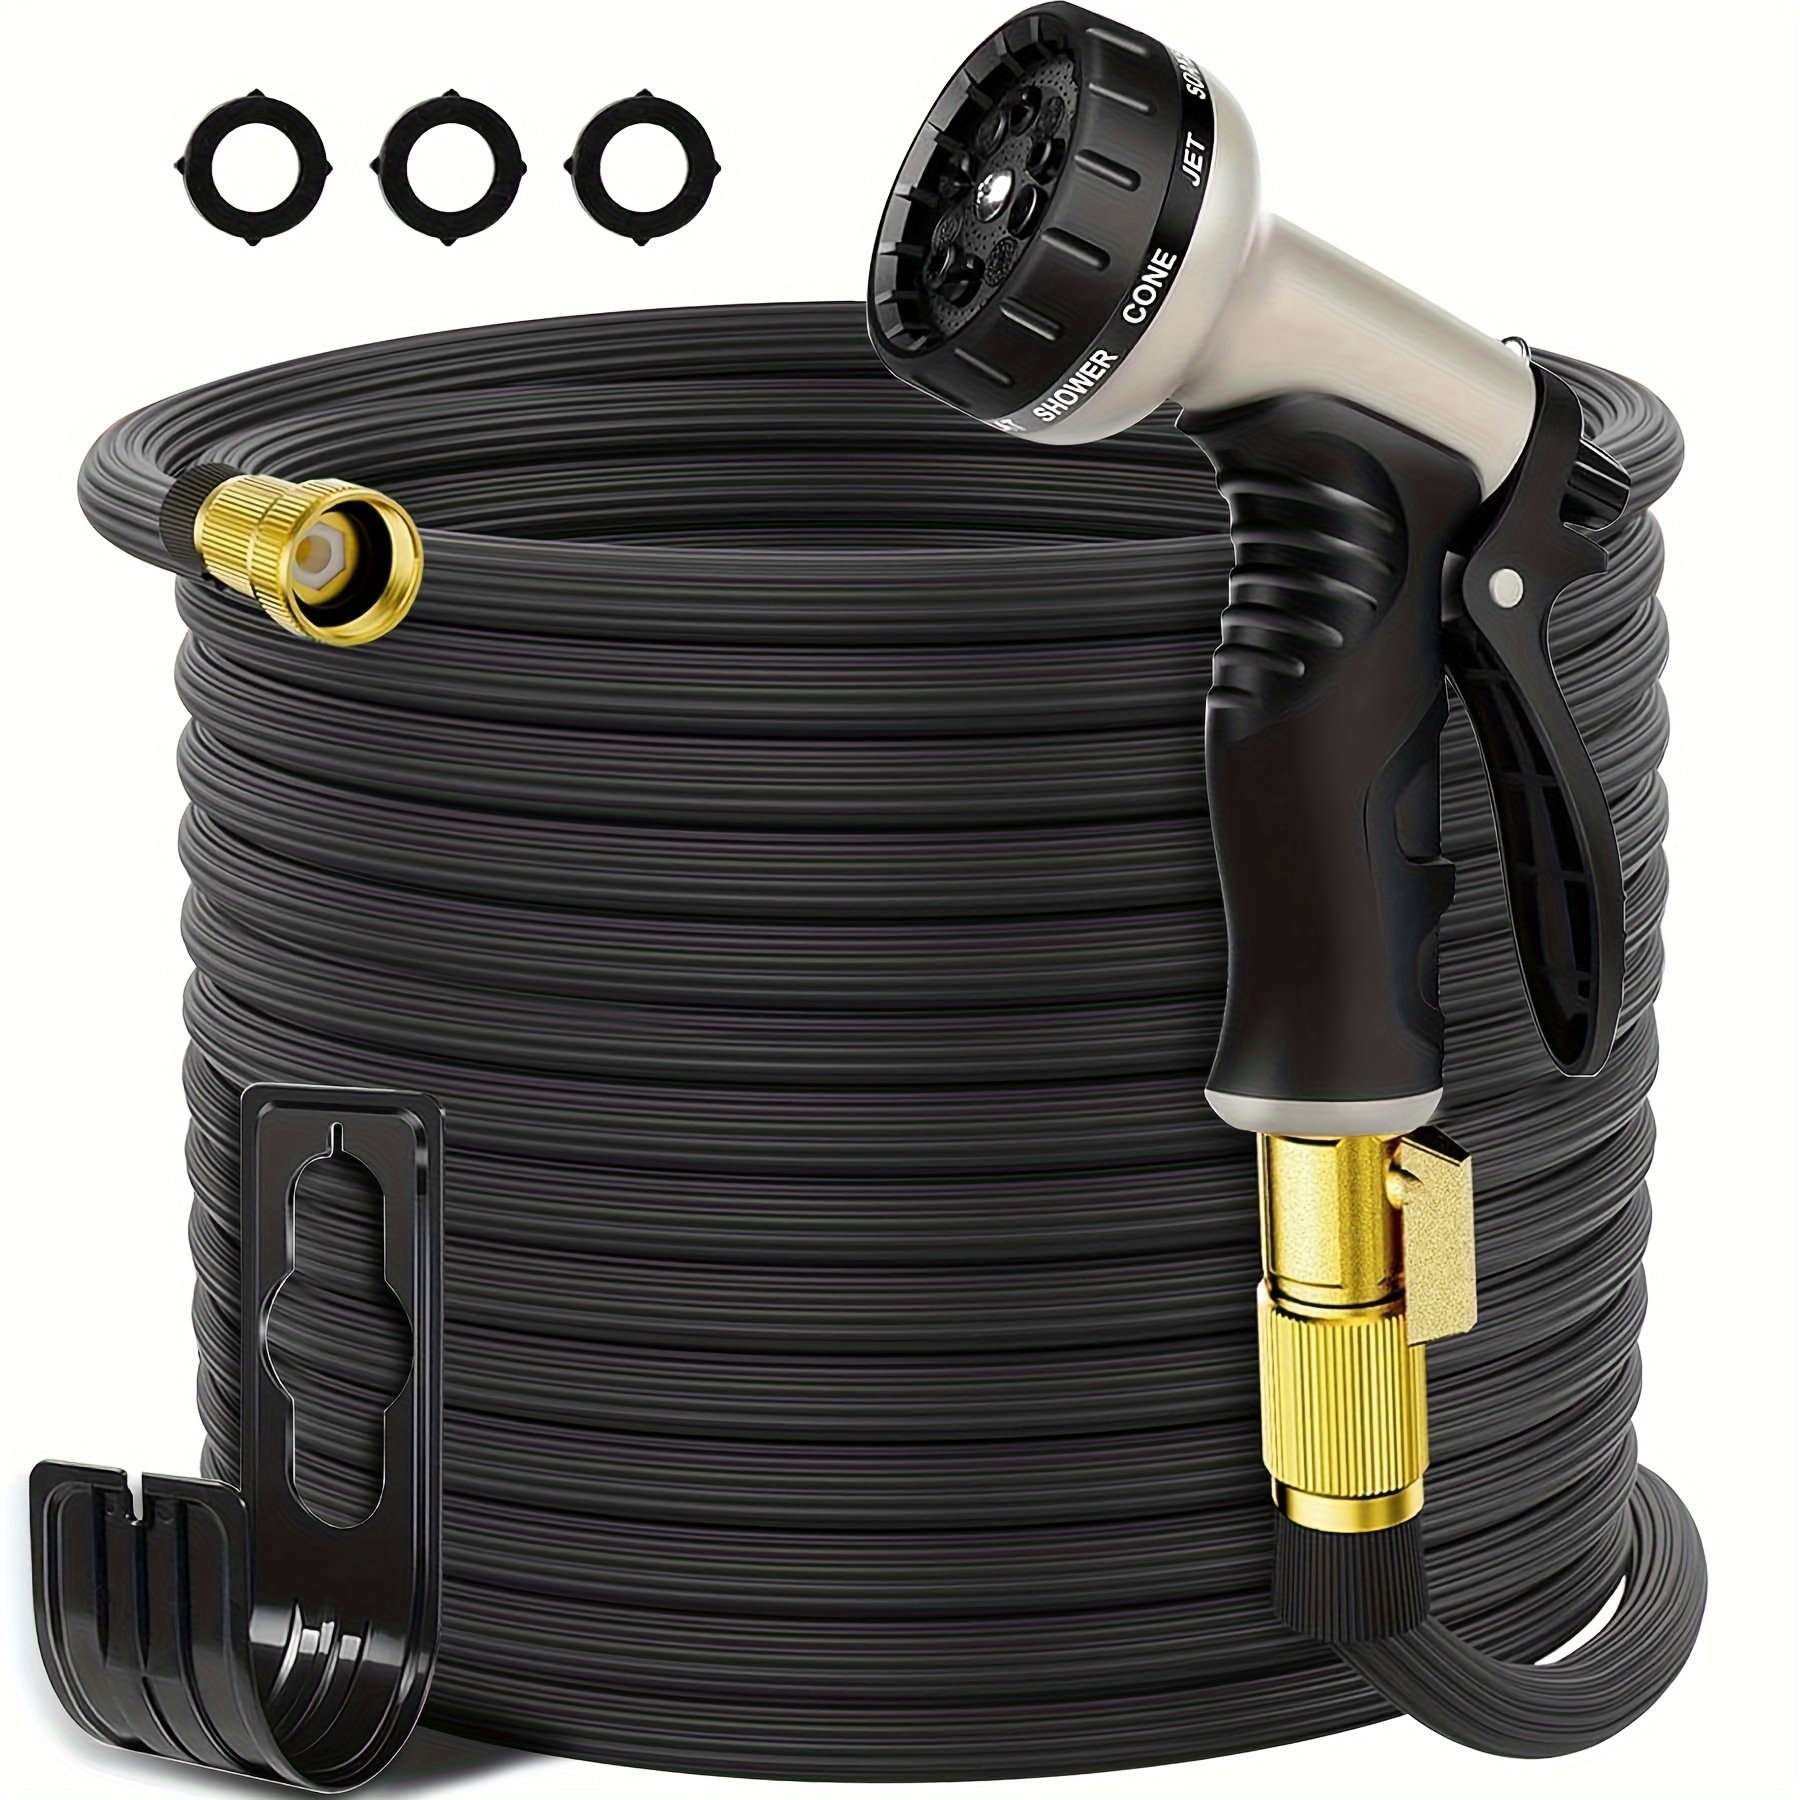 

Garden Hose 100ft, Expandable Garden Hose 100ft With Nozzle & Holder, Retractable Water Hose Lightweight No-kink Leak-proof For Gardening Watering Cleaning